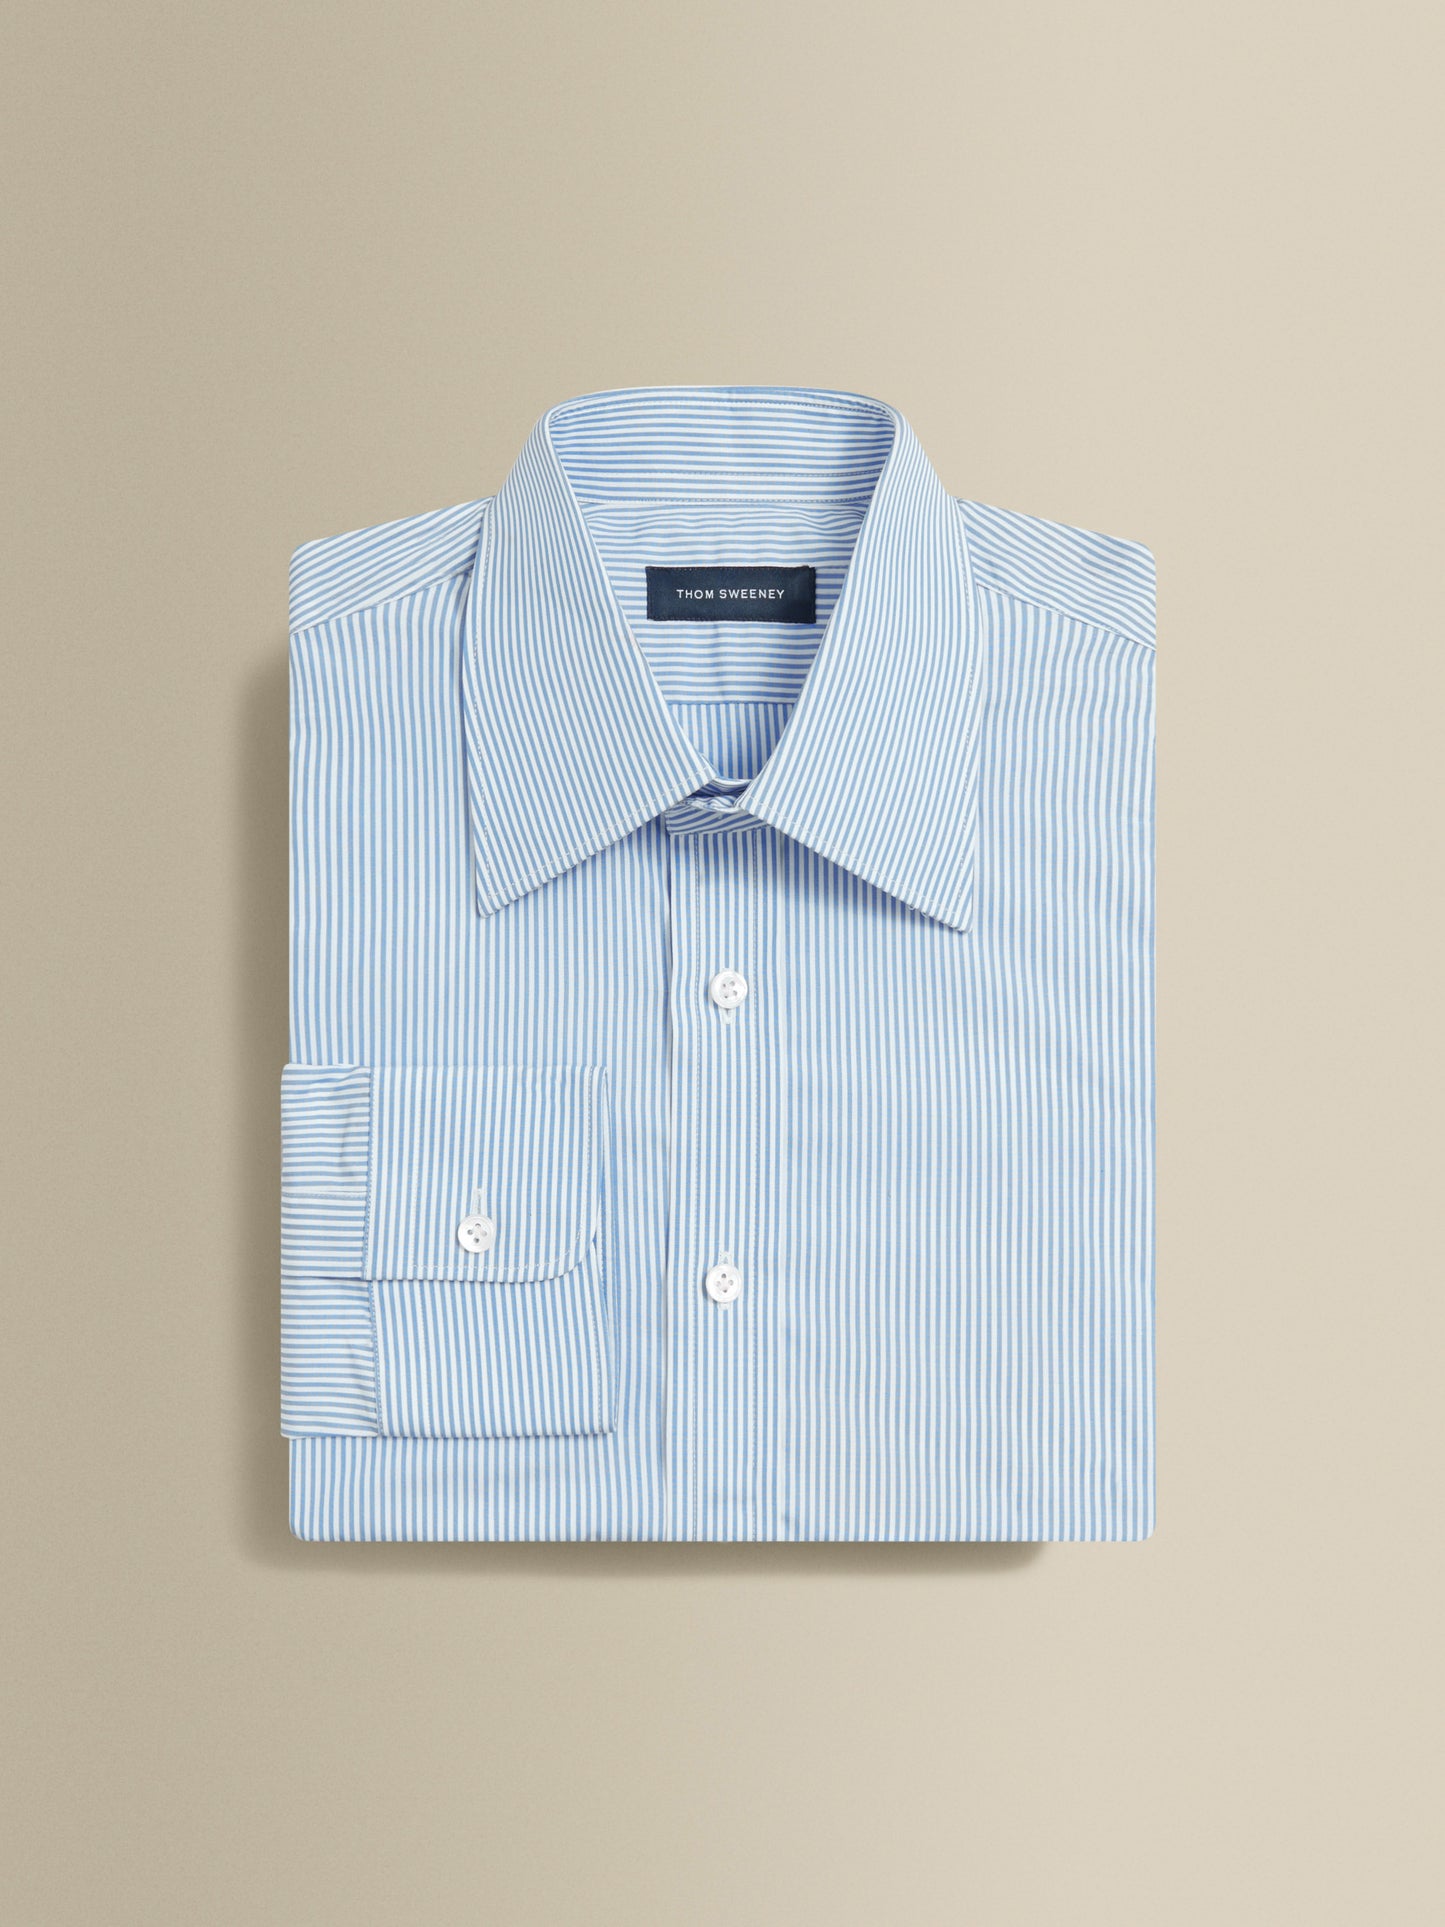 Solid Poplin Point Collar Bengal Stripe Shirt Product Image